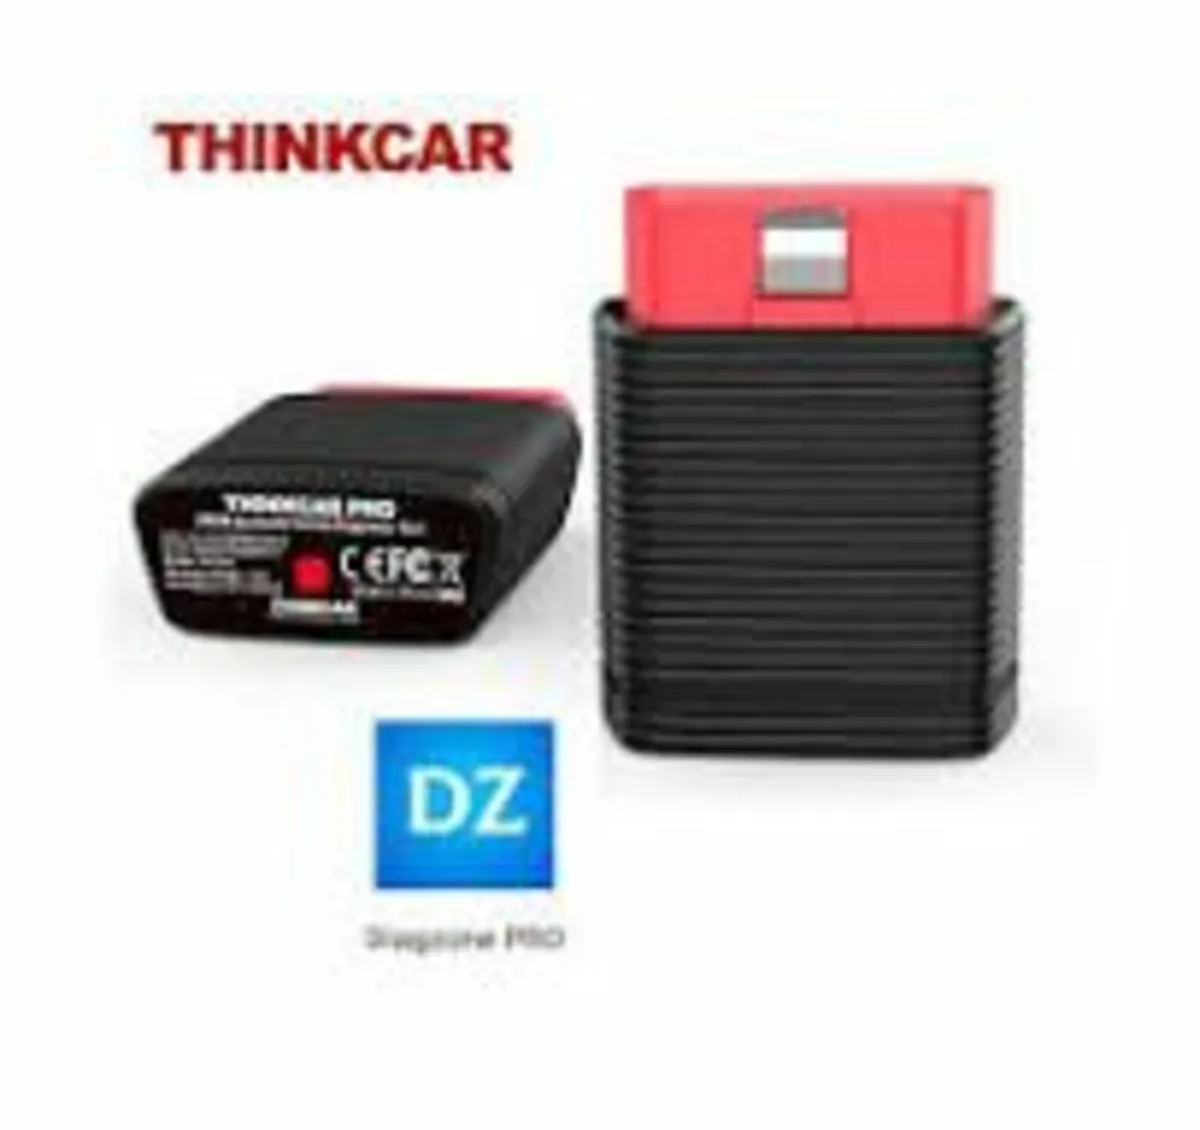 Launch X431 Thinkcar Diagzone Pro+Tablet. - Image 1